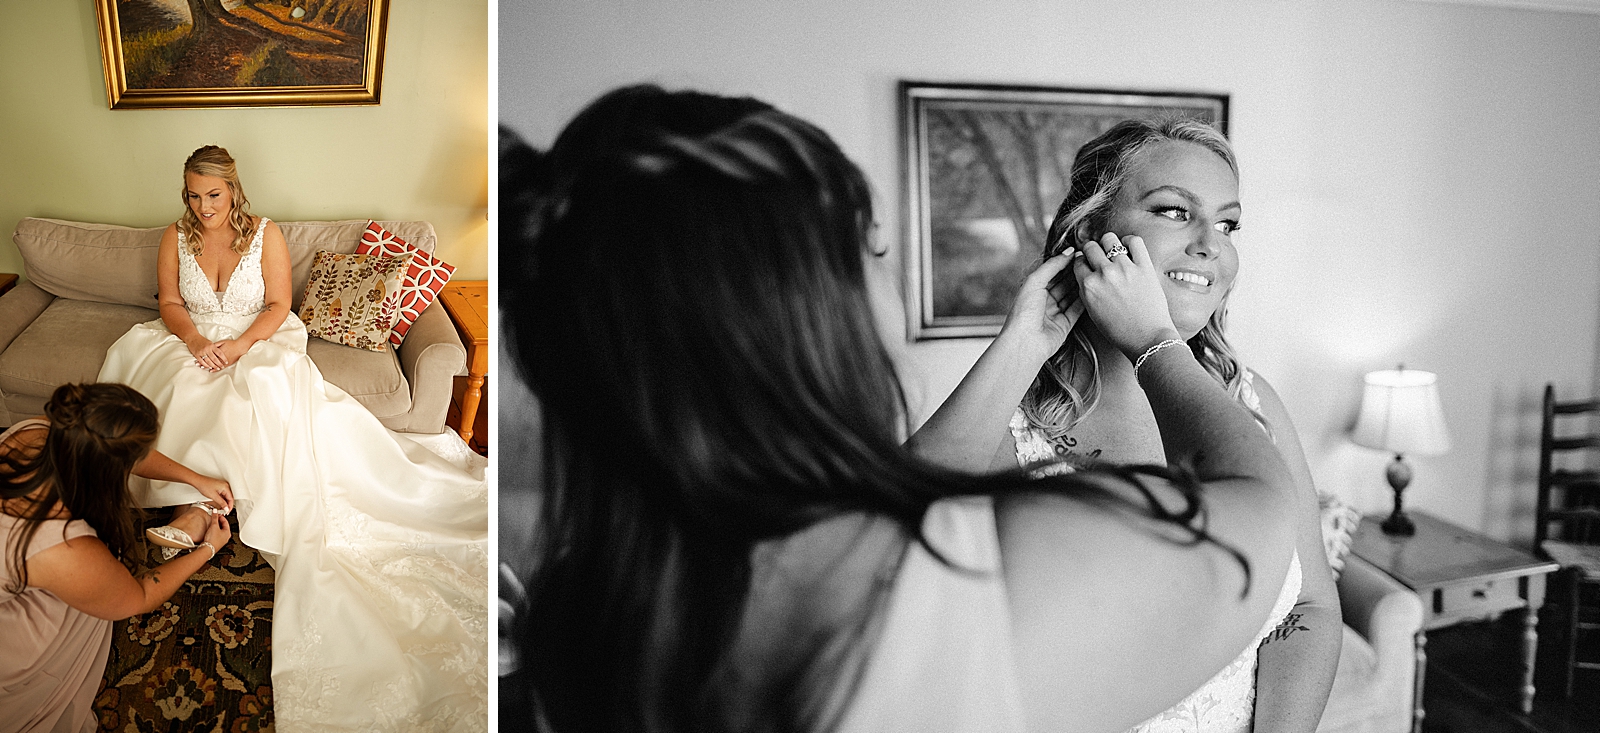 Bride finishing up getting ready with help